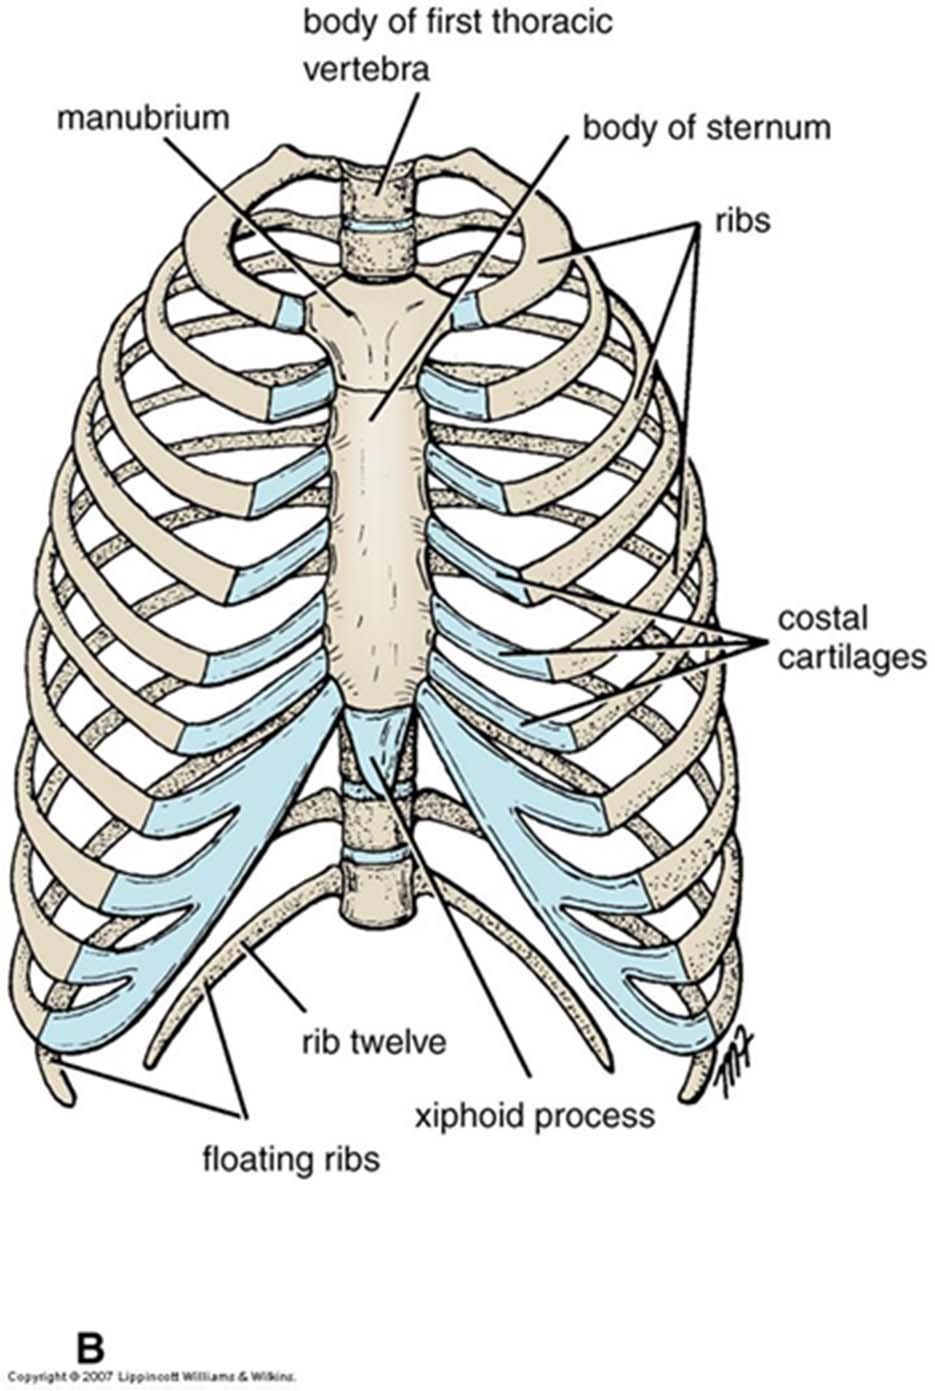 Bony cage flattened from front to back Sternum (breastbone) Ribs laterally 1 7 are true ribs (vertebrosternal) 8 10 are false ribs (vertebrochondral) 11 12 are floating Costal